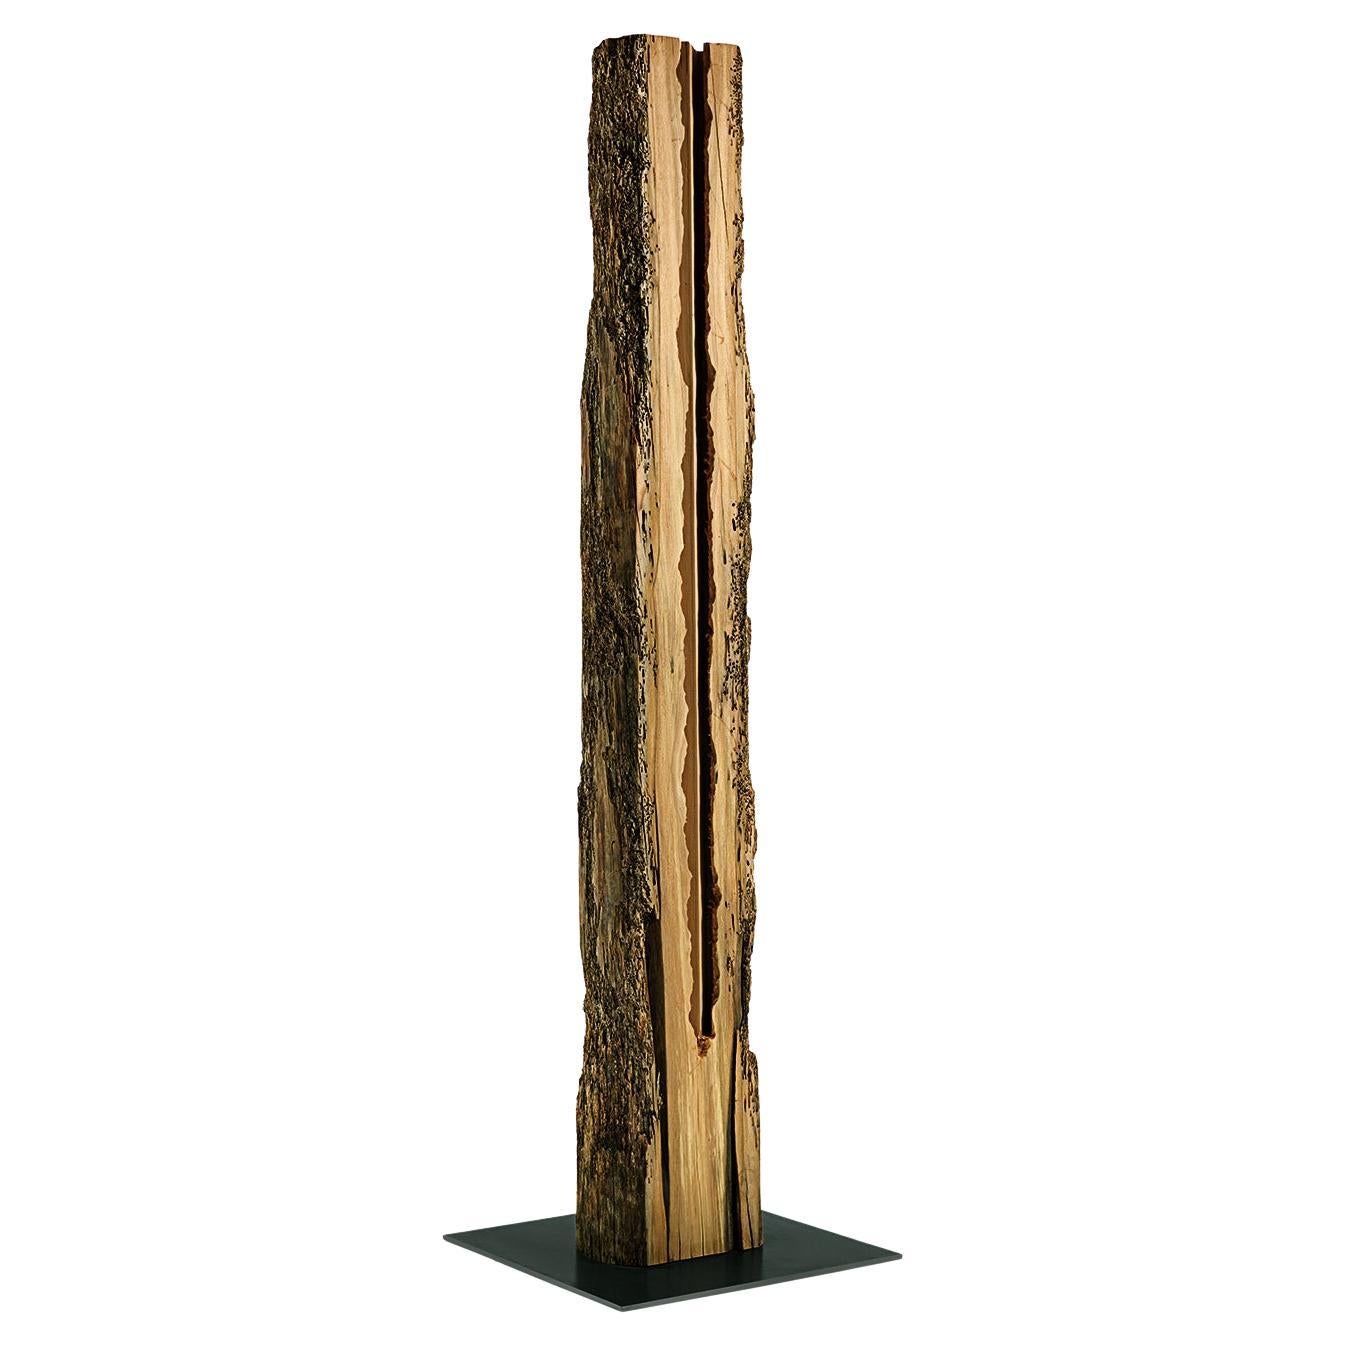 Opening Raw Oak Sculpture For Sale